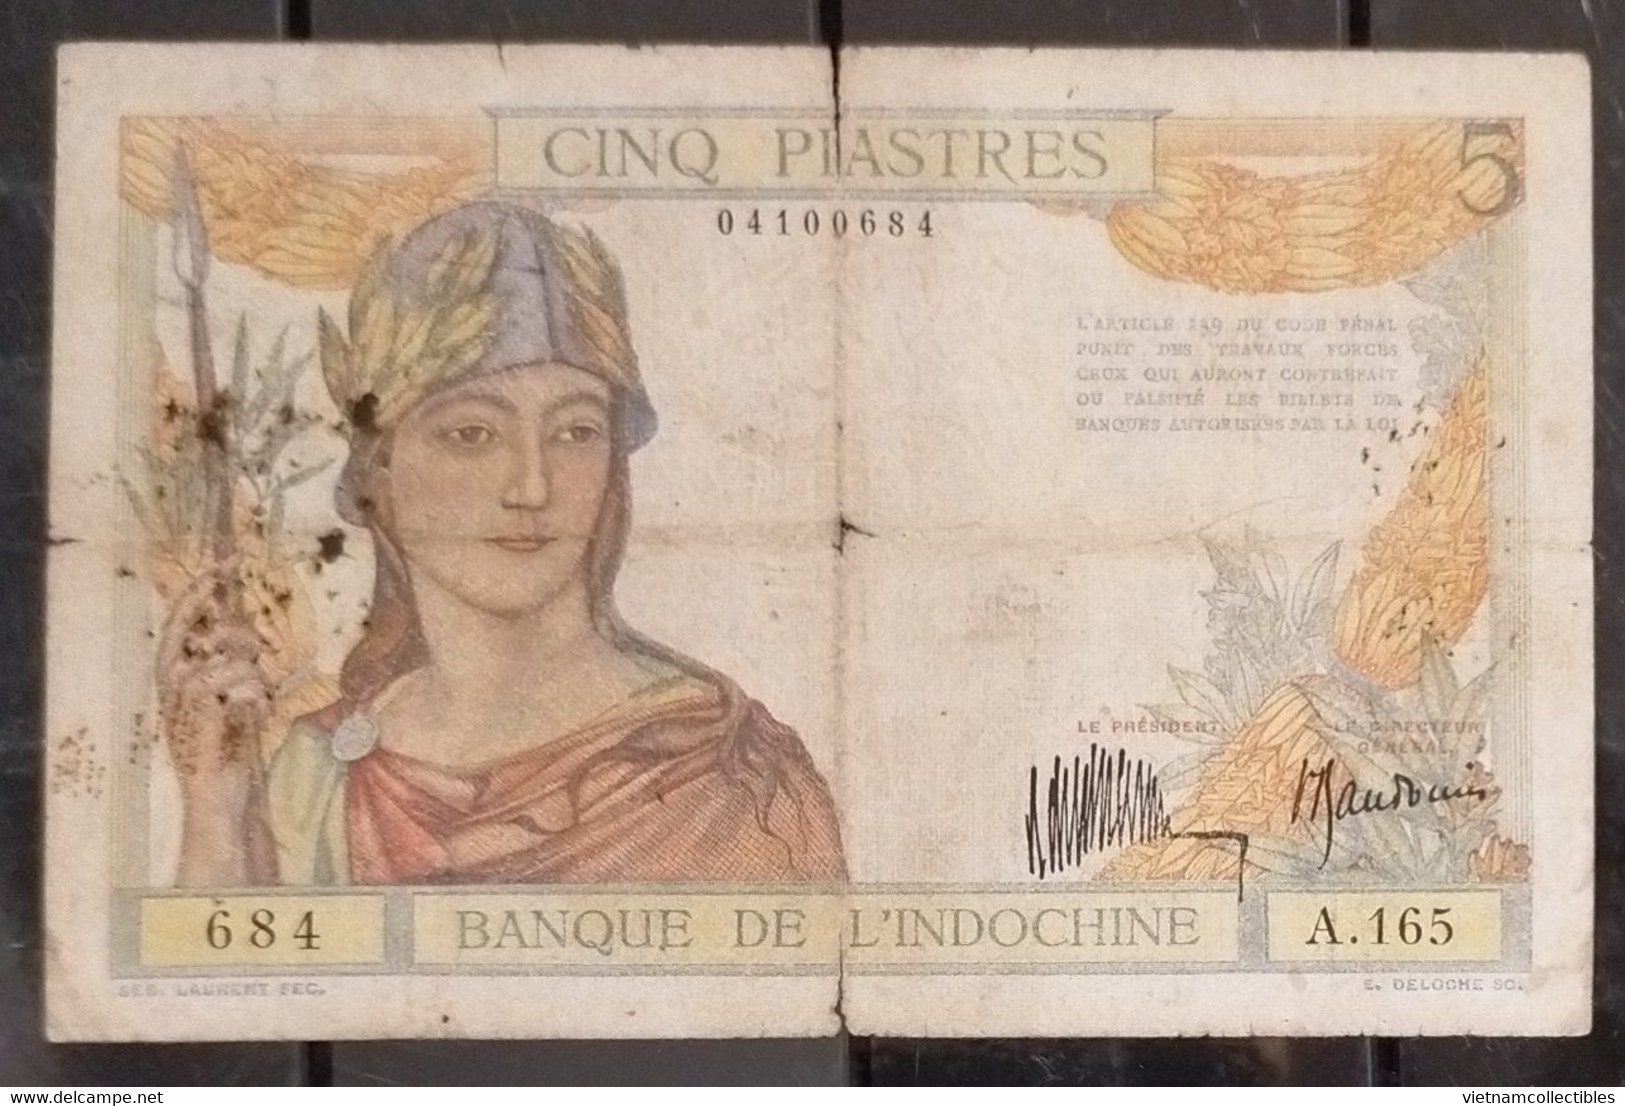 French Indochina Indo China Indochine Laos Vietnam Cambodia 5 Piastres Fine Banknote Note 1932 - Pick # 53a / 2 Photos - Indocina